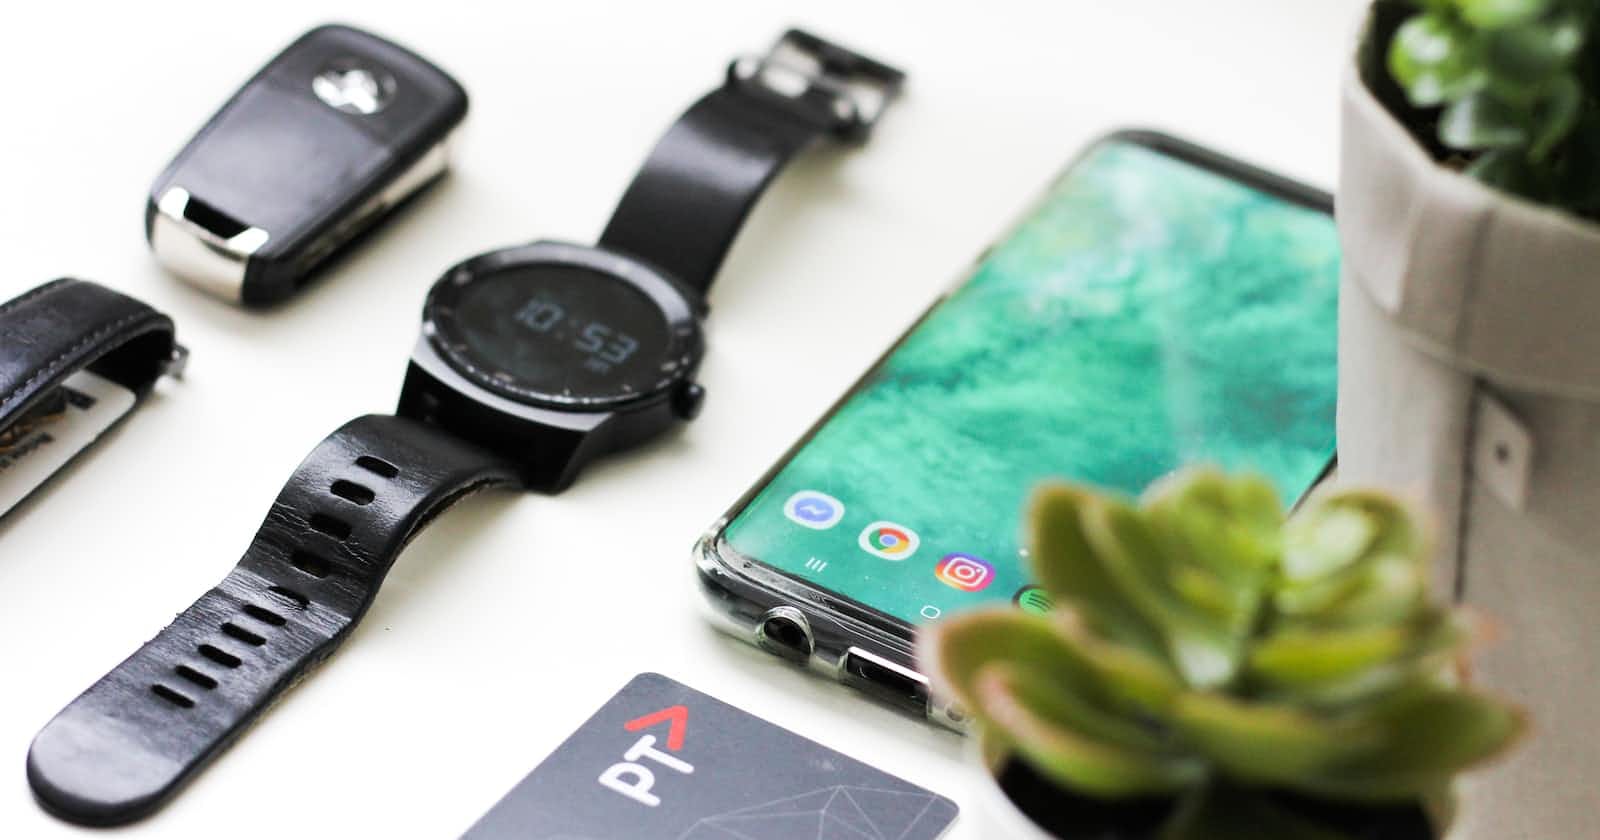 Transferring data between Android and Wear OS